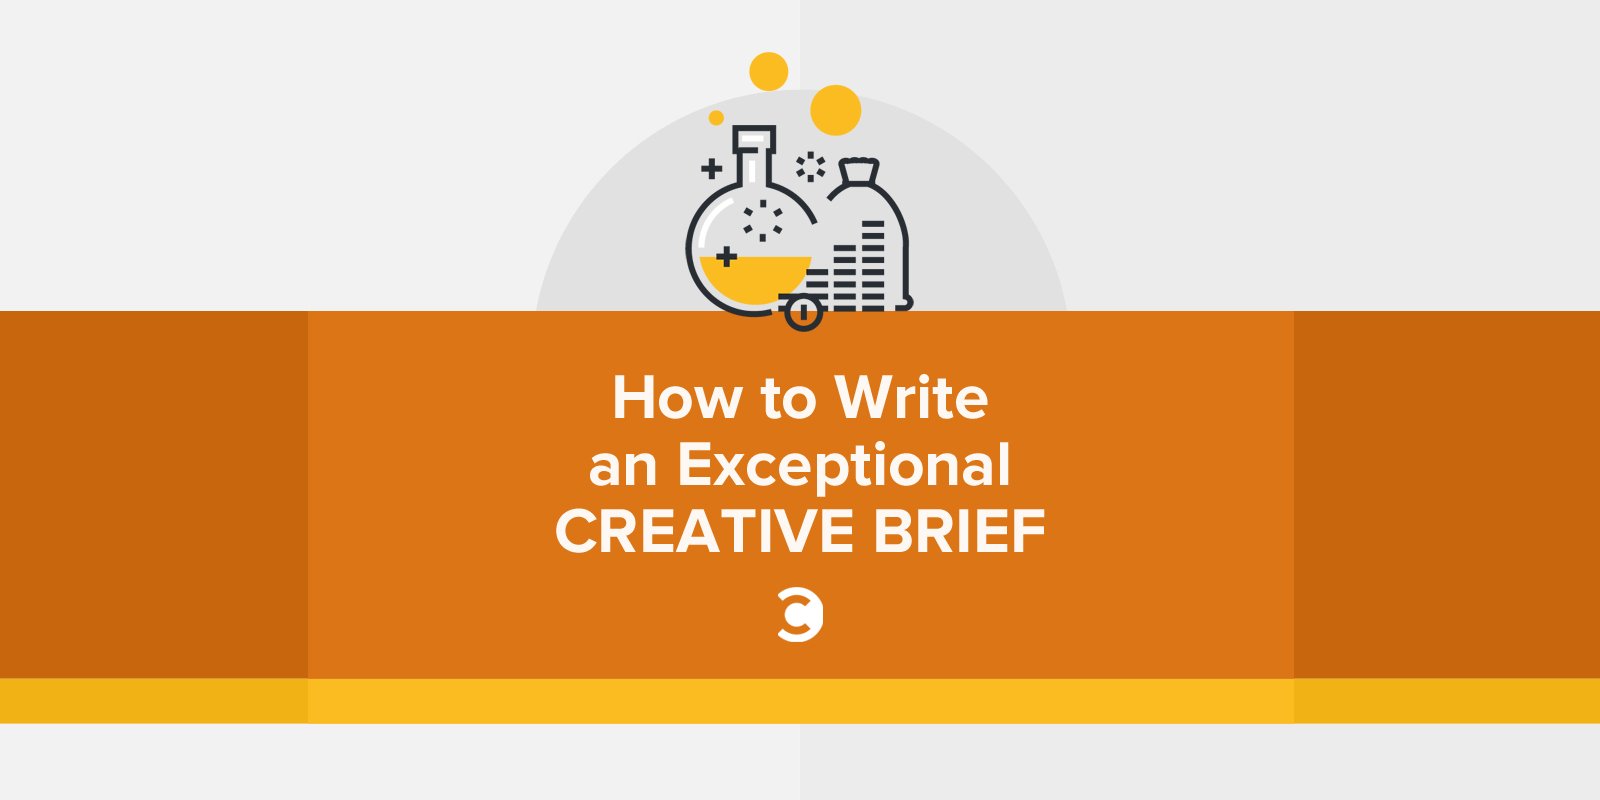 How to Write an Exceptional Creative Brief